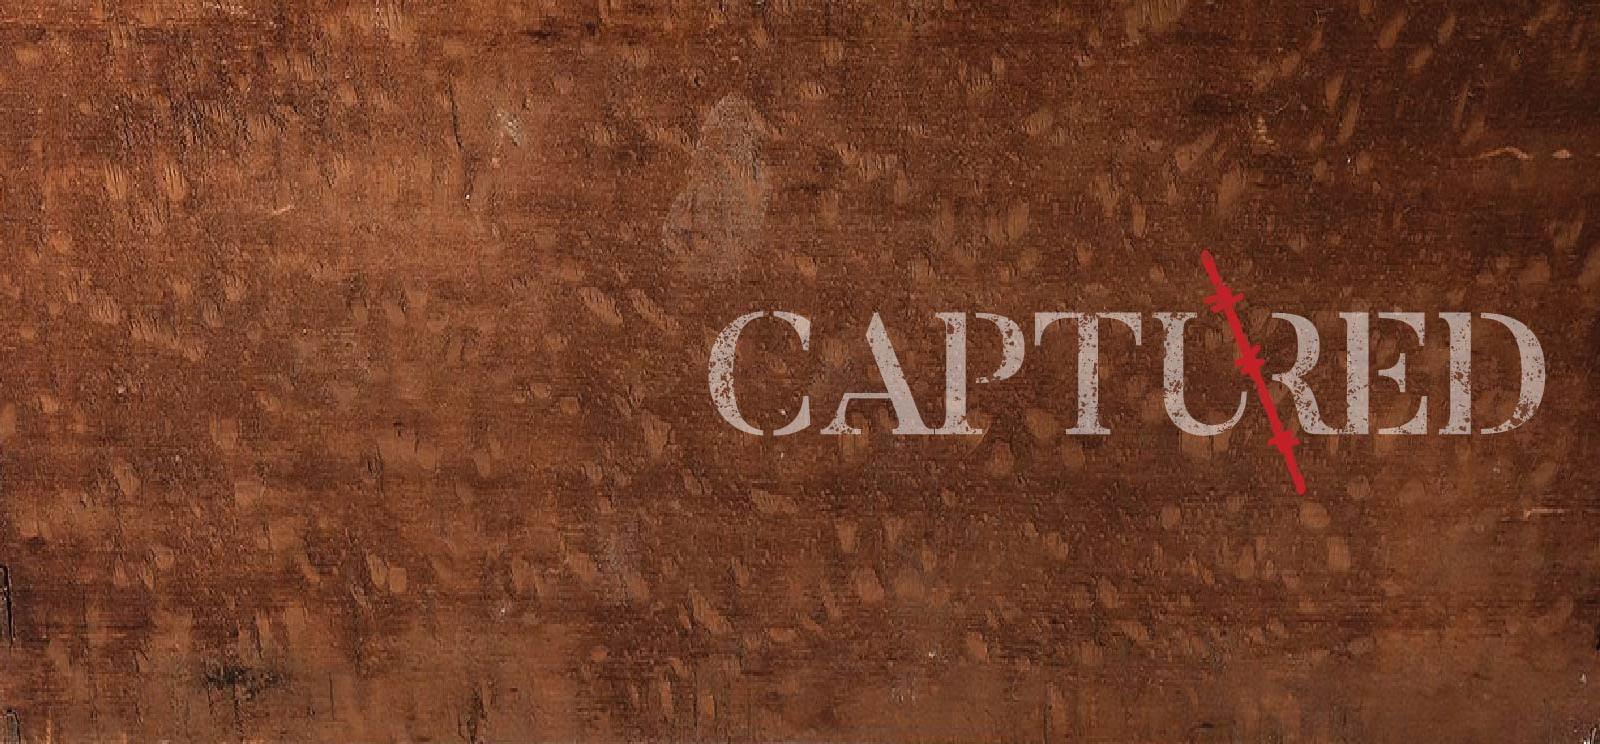 Text: 'Captured' in distressed typewriter font on wood background with a red barbed wire slash through the middle